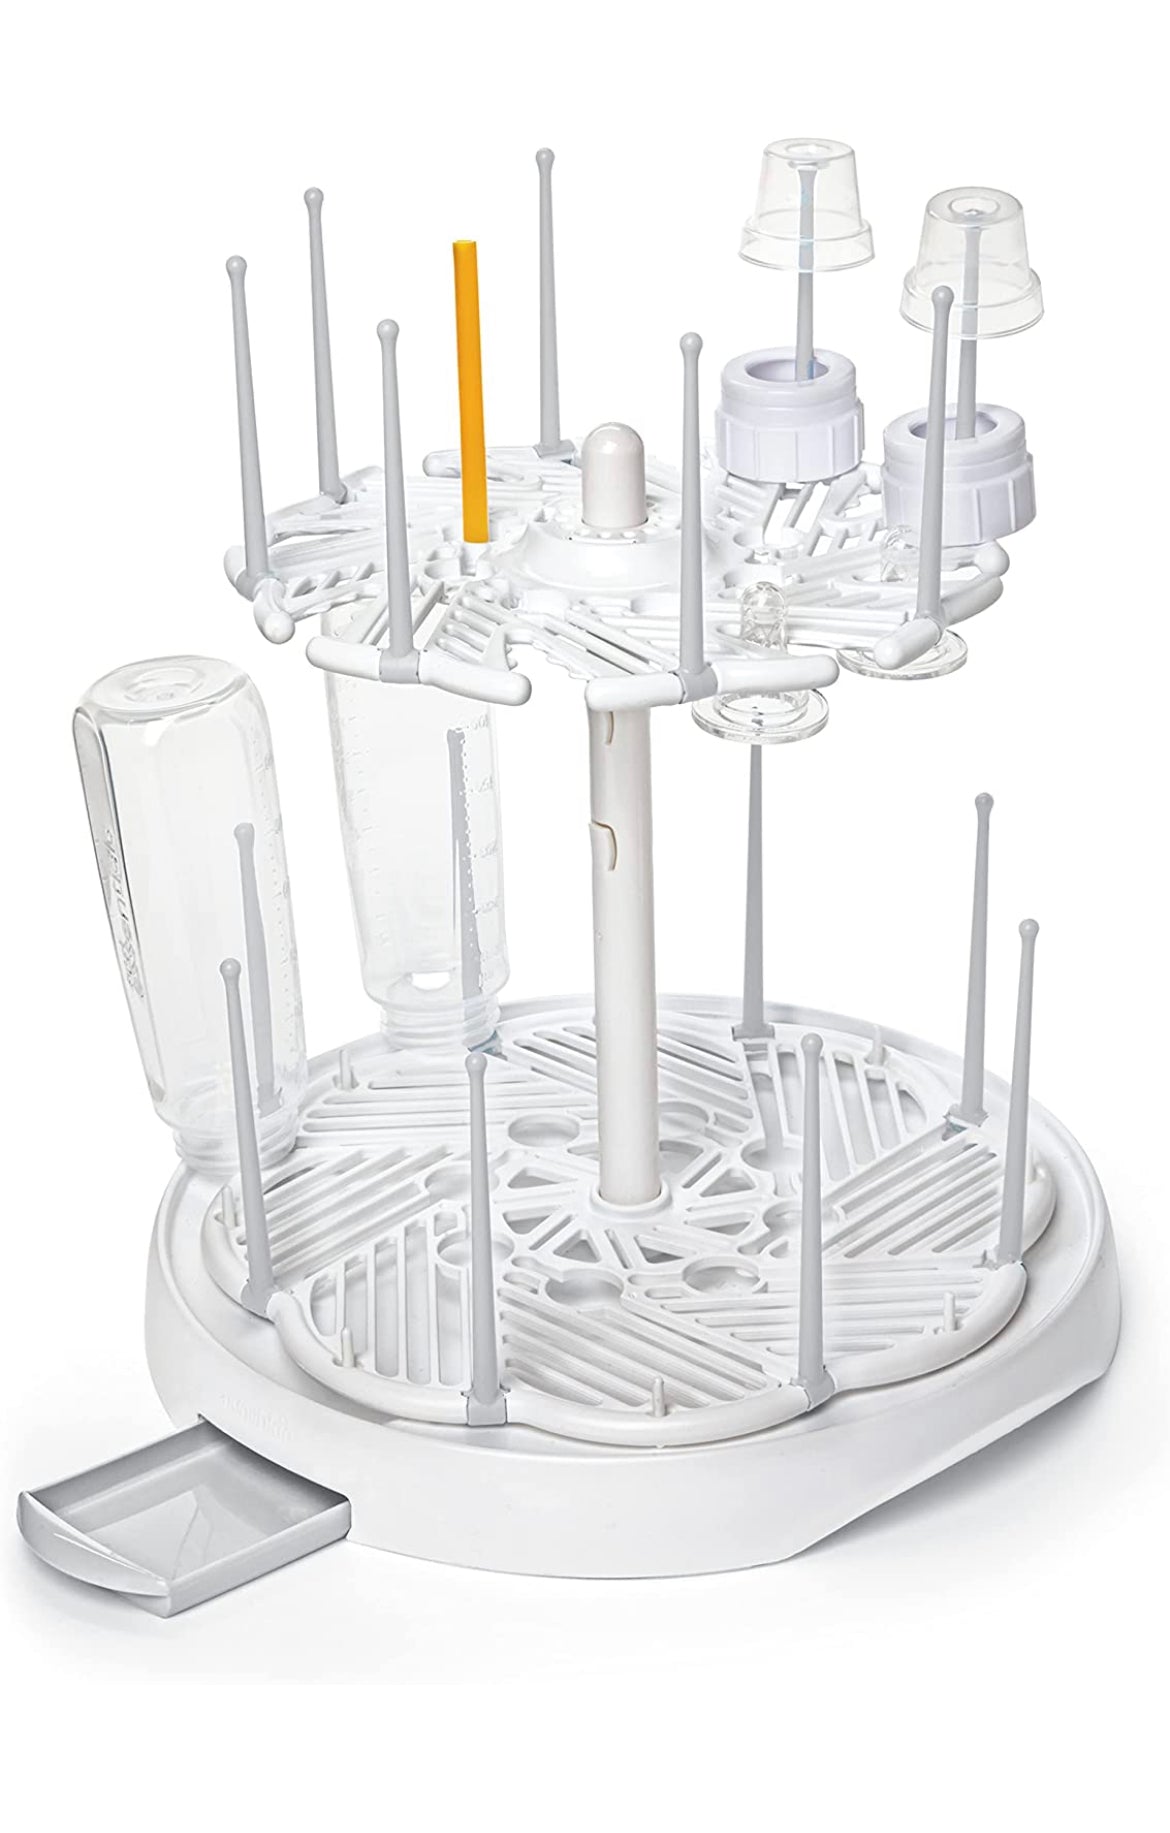 Munchkin High Capacity Drying Rack for Baby Bottles and Accessories, White.